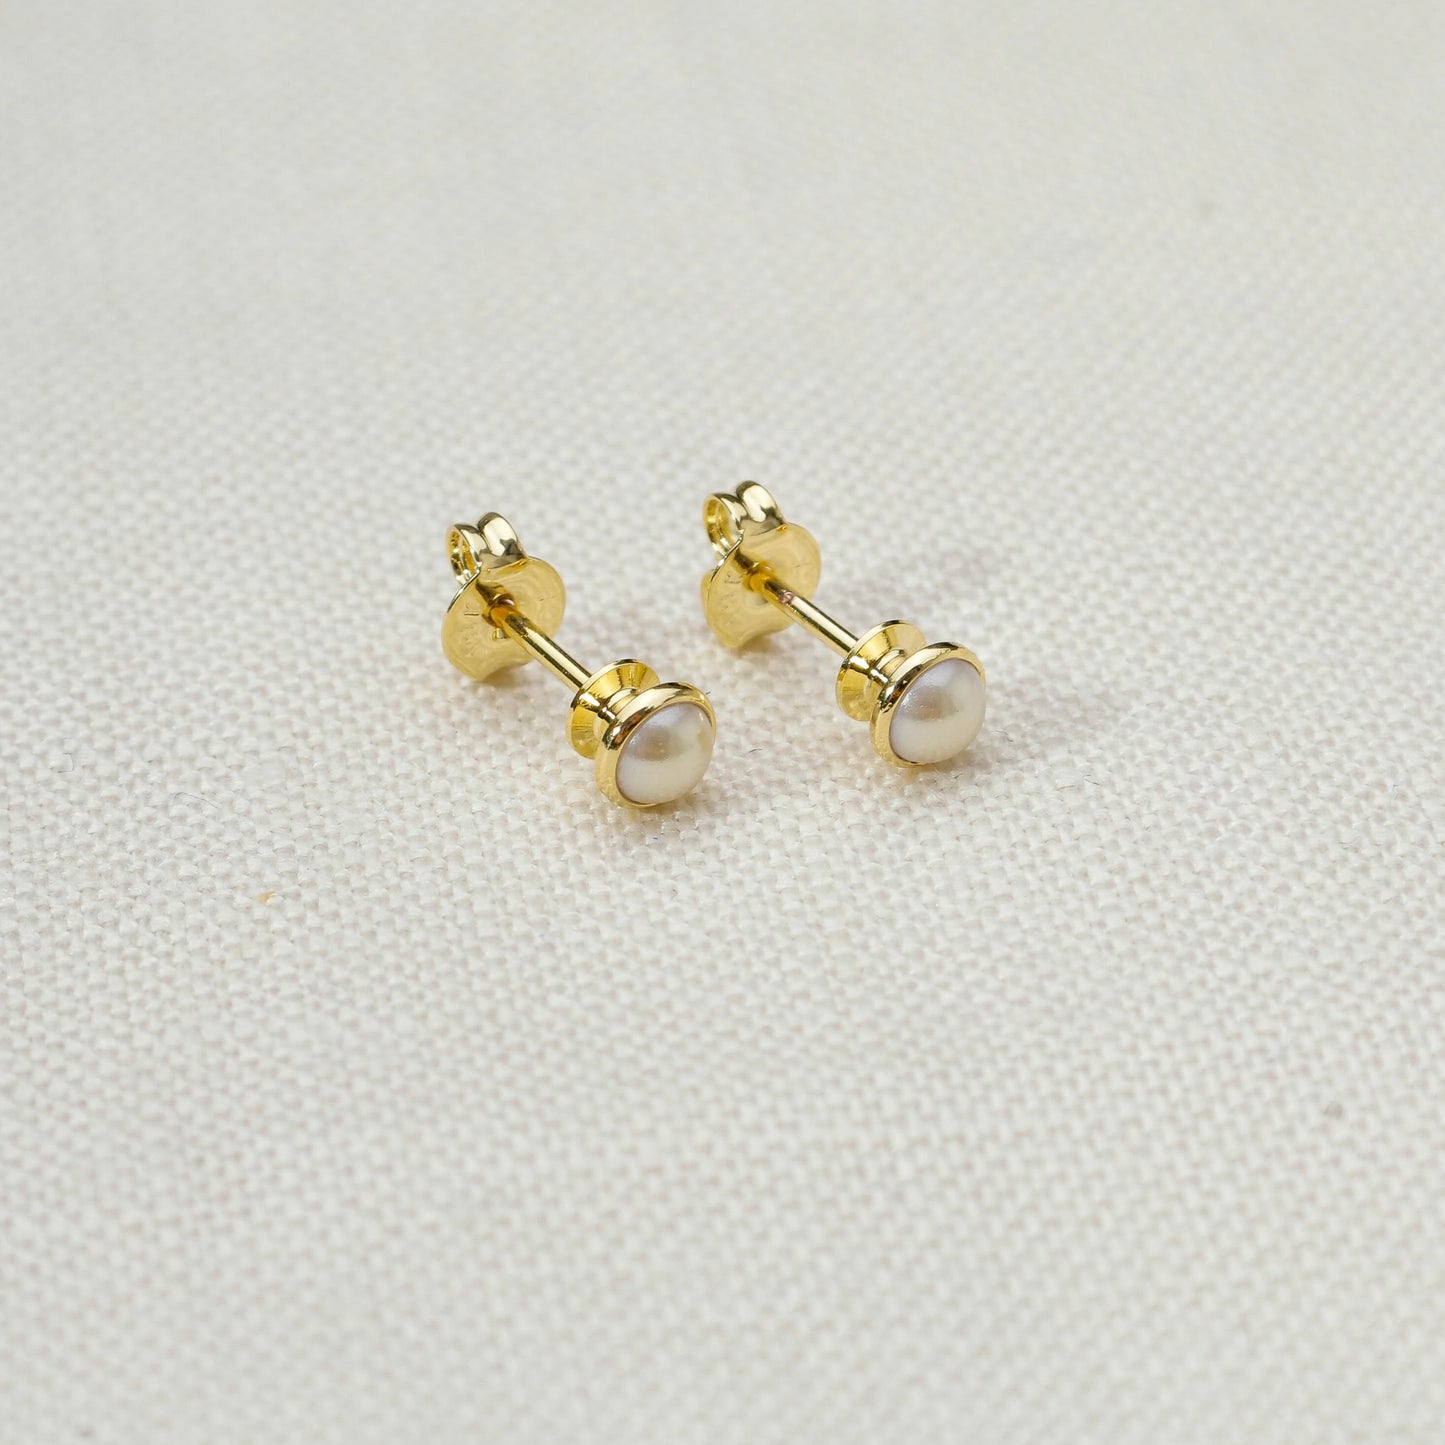 18k Gold Filled 4mm Simulated Pearl Stud Earrings